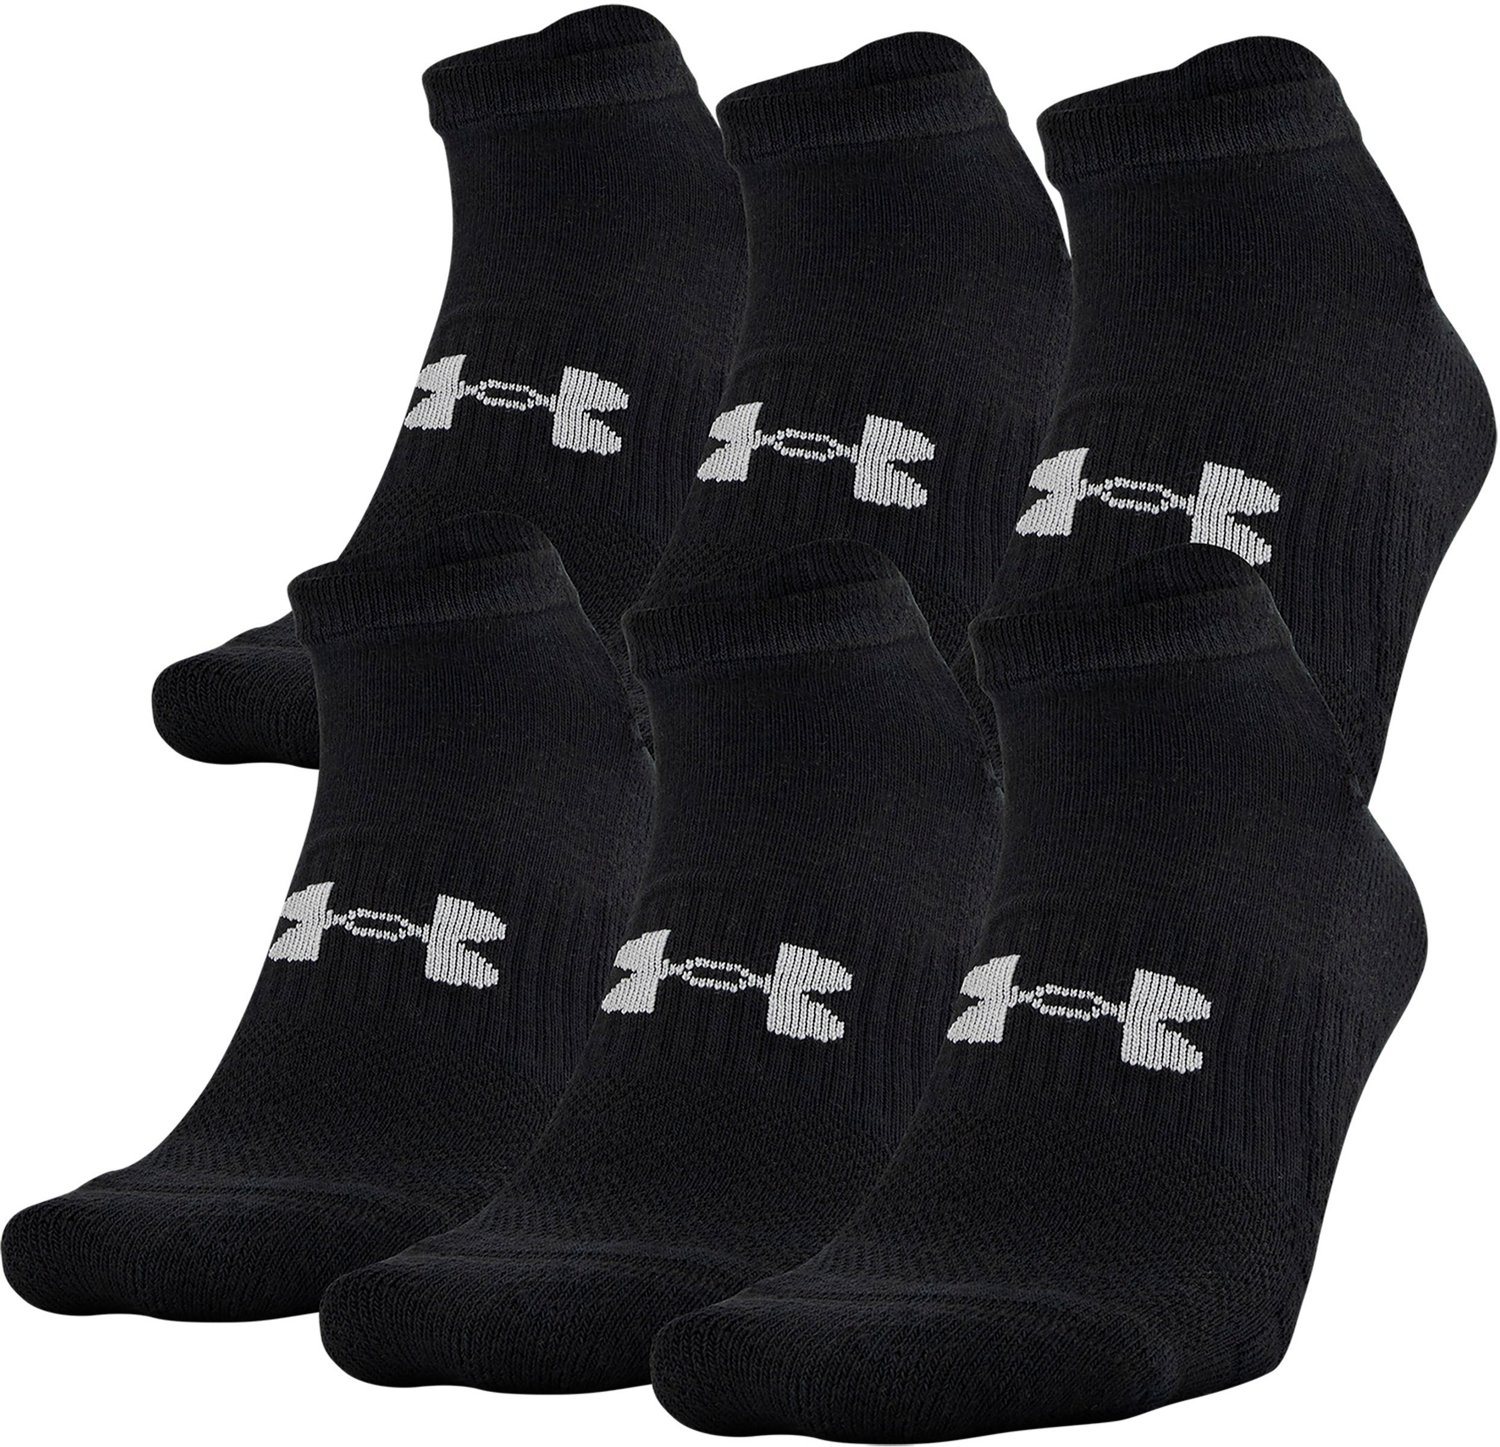 Under Armour Training No Show Socks 6 Pack